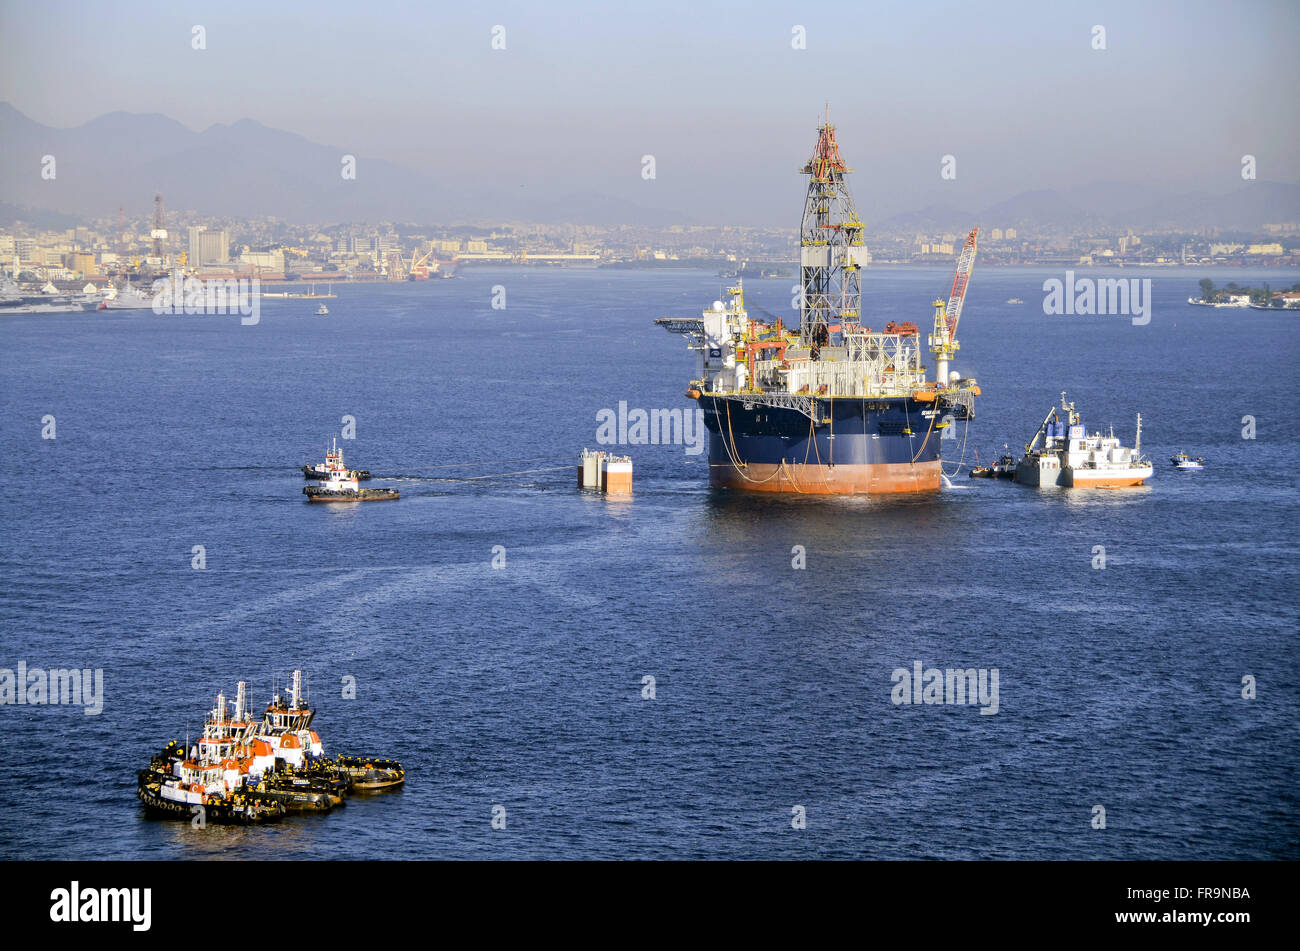 Aerial view of oil platform in the Bay of Guanabara Stock Photo